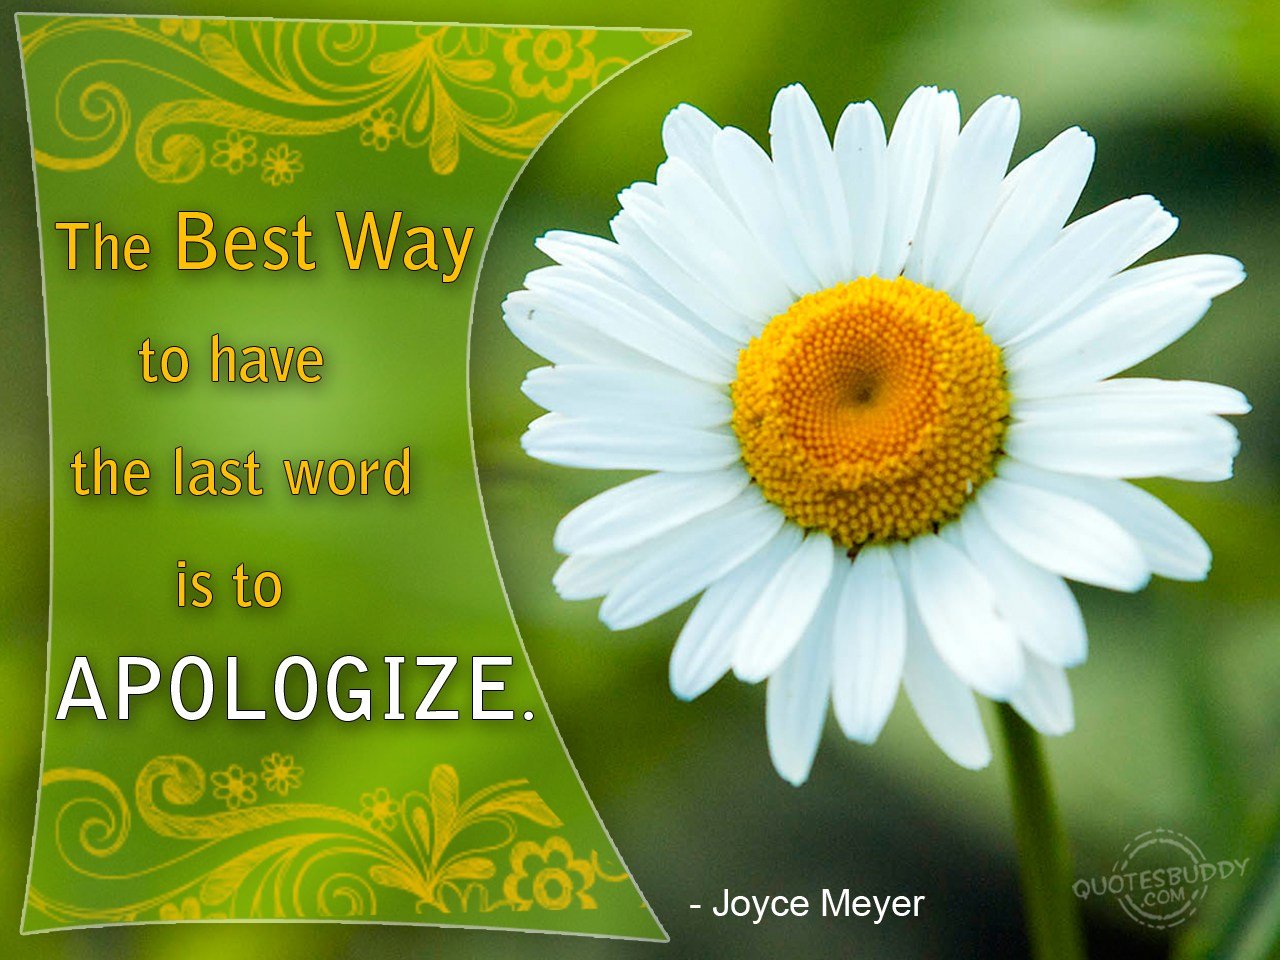 Joyce Meyer Quotes On Friendship. QuotesGram